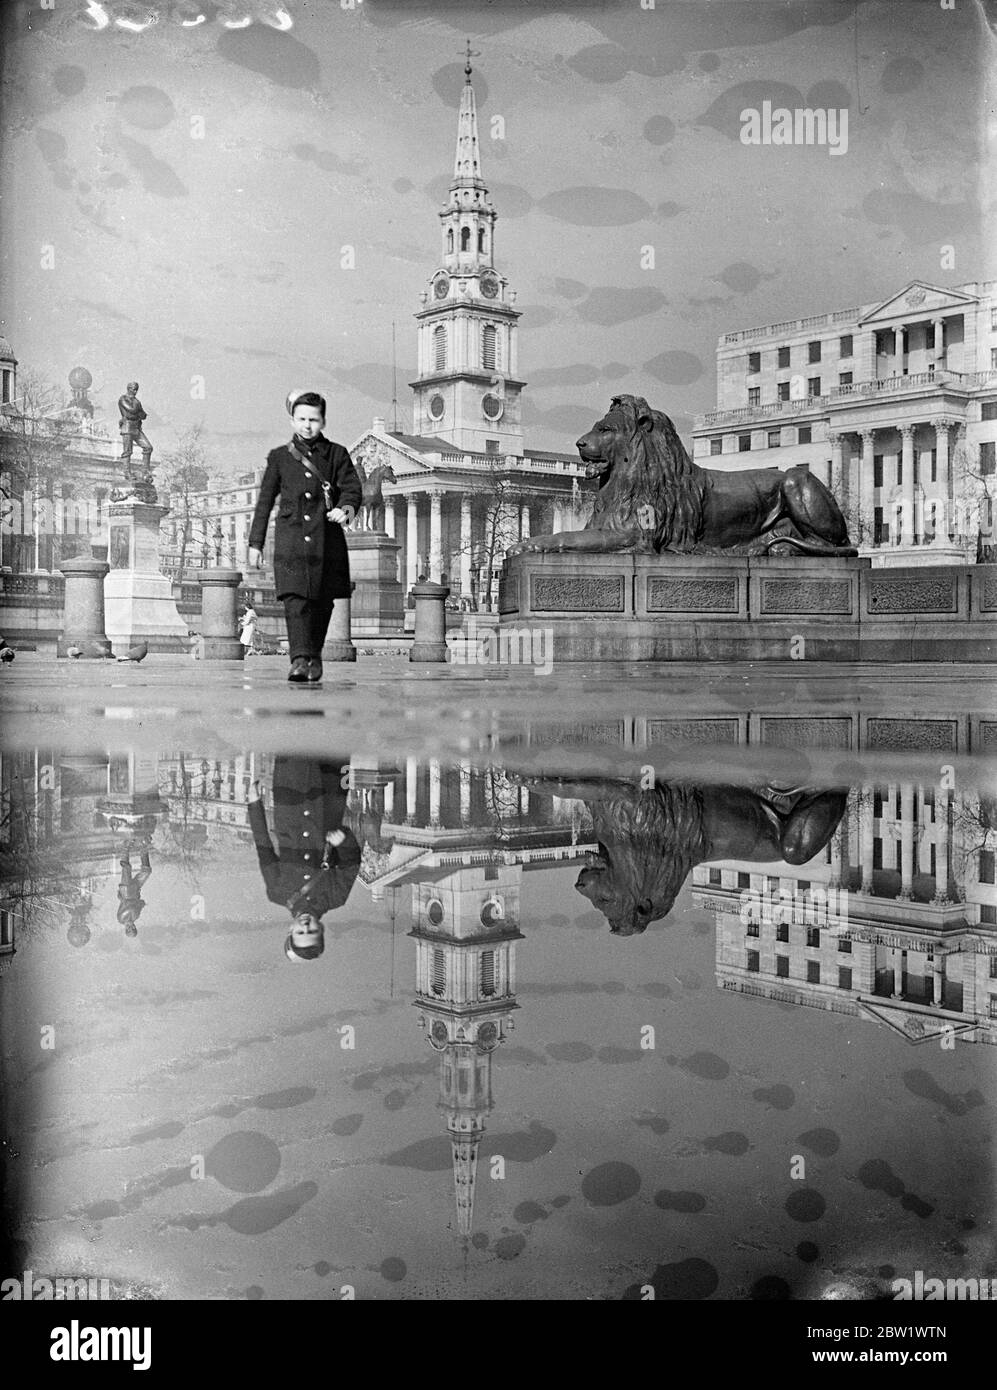 April showers make a Trafalgar Square mirror. The church of St Martin in the Fields, South Africa House and one of the Trafalgar Square Lions reflected in a pool of water after the rain. 16 April 1937 Stock Photo